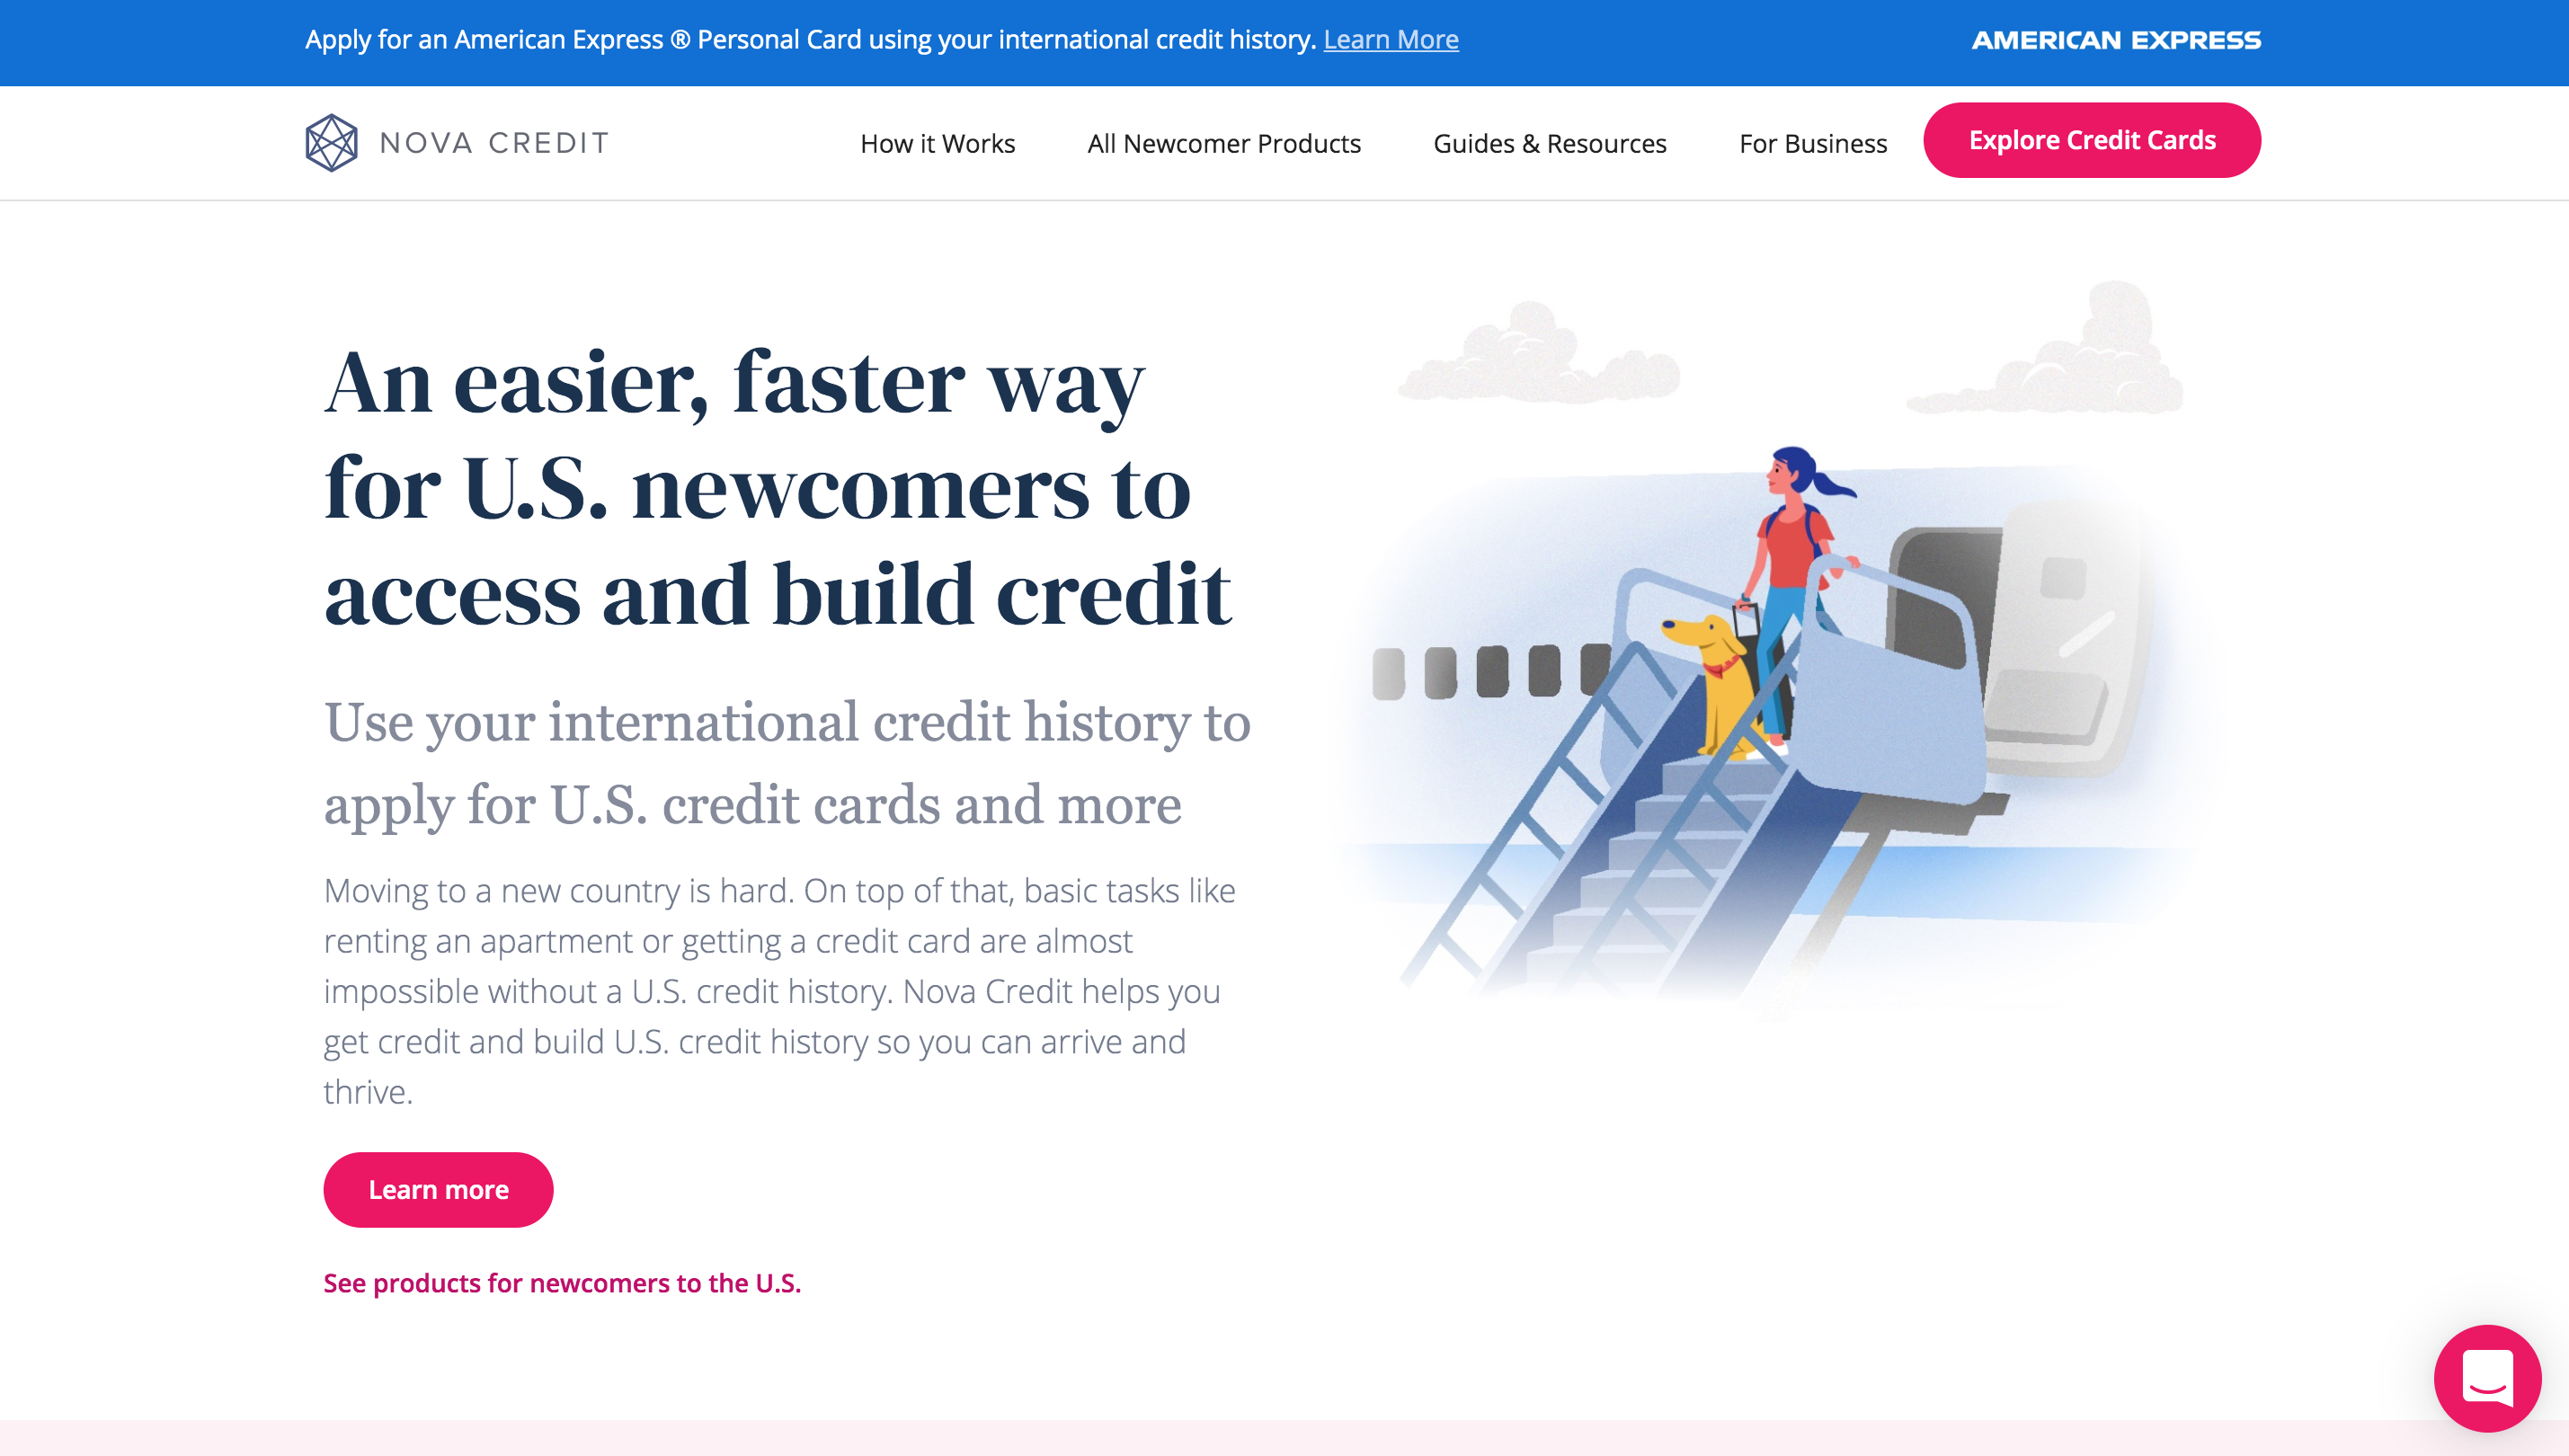 AmEx, Nova Credit to Help extend credit to newcomers